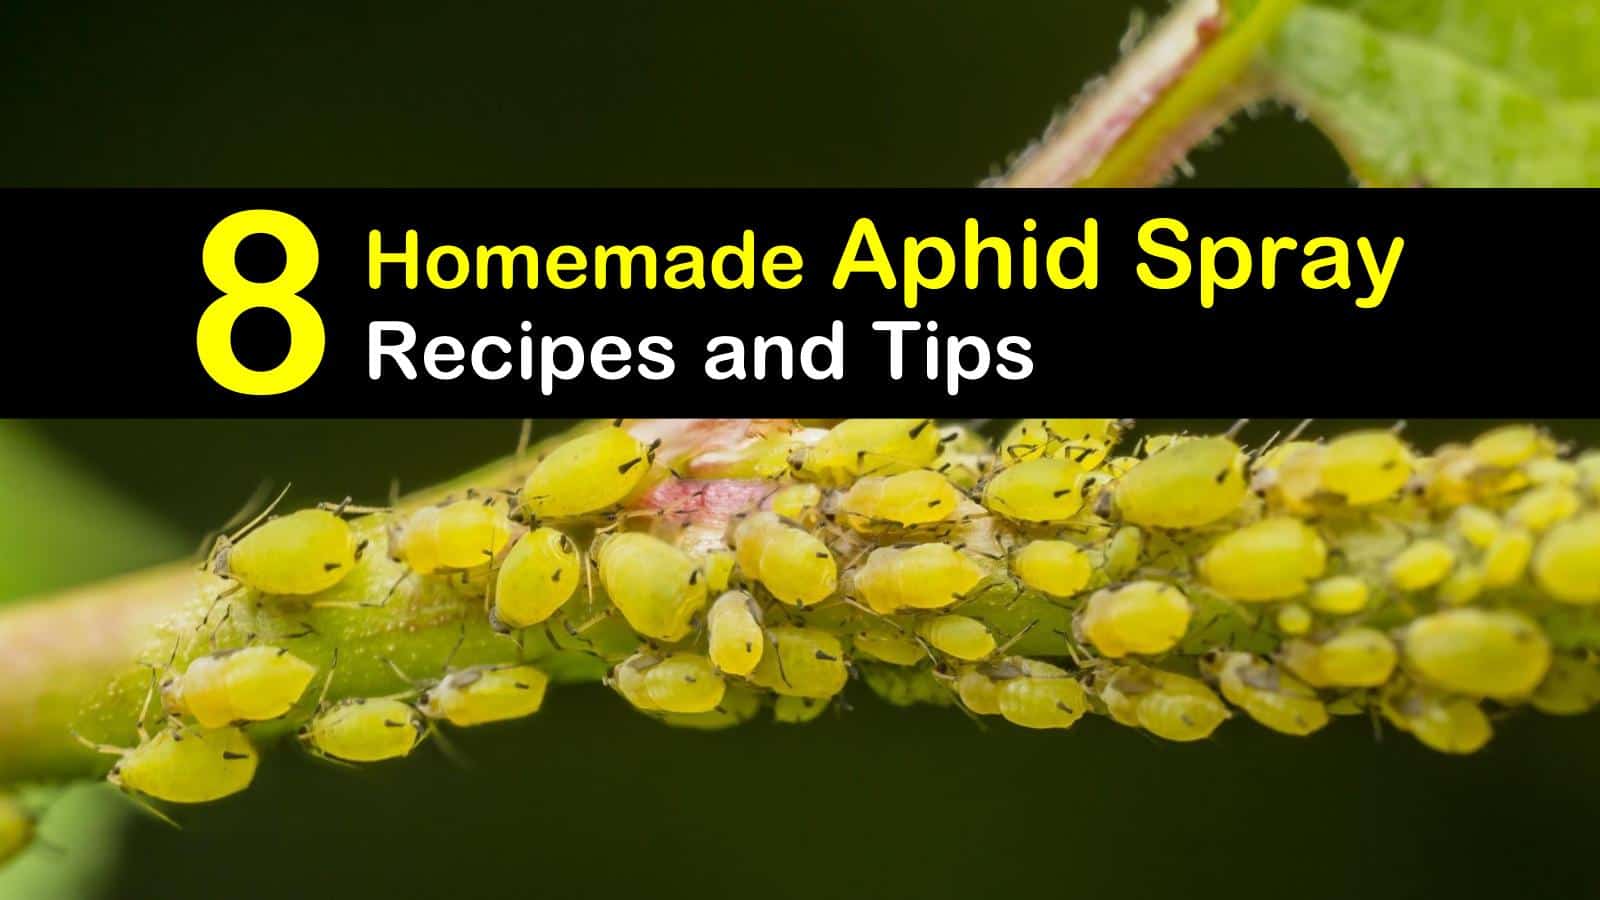 Controlling Aphids: 8 Homemade Aphid